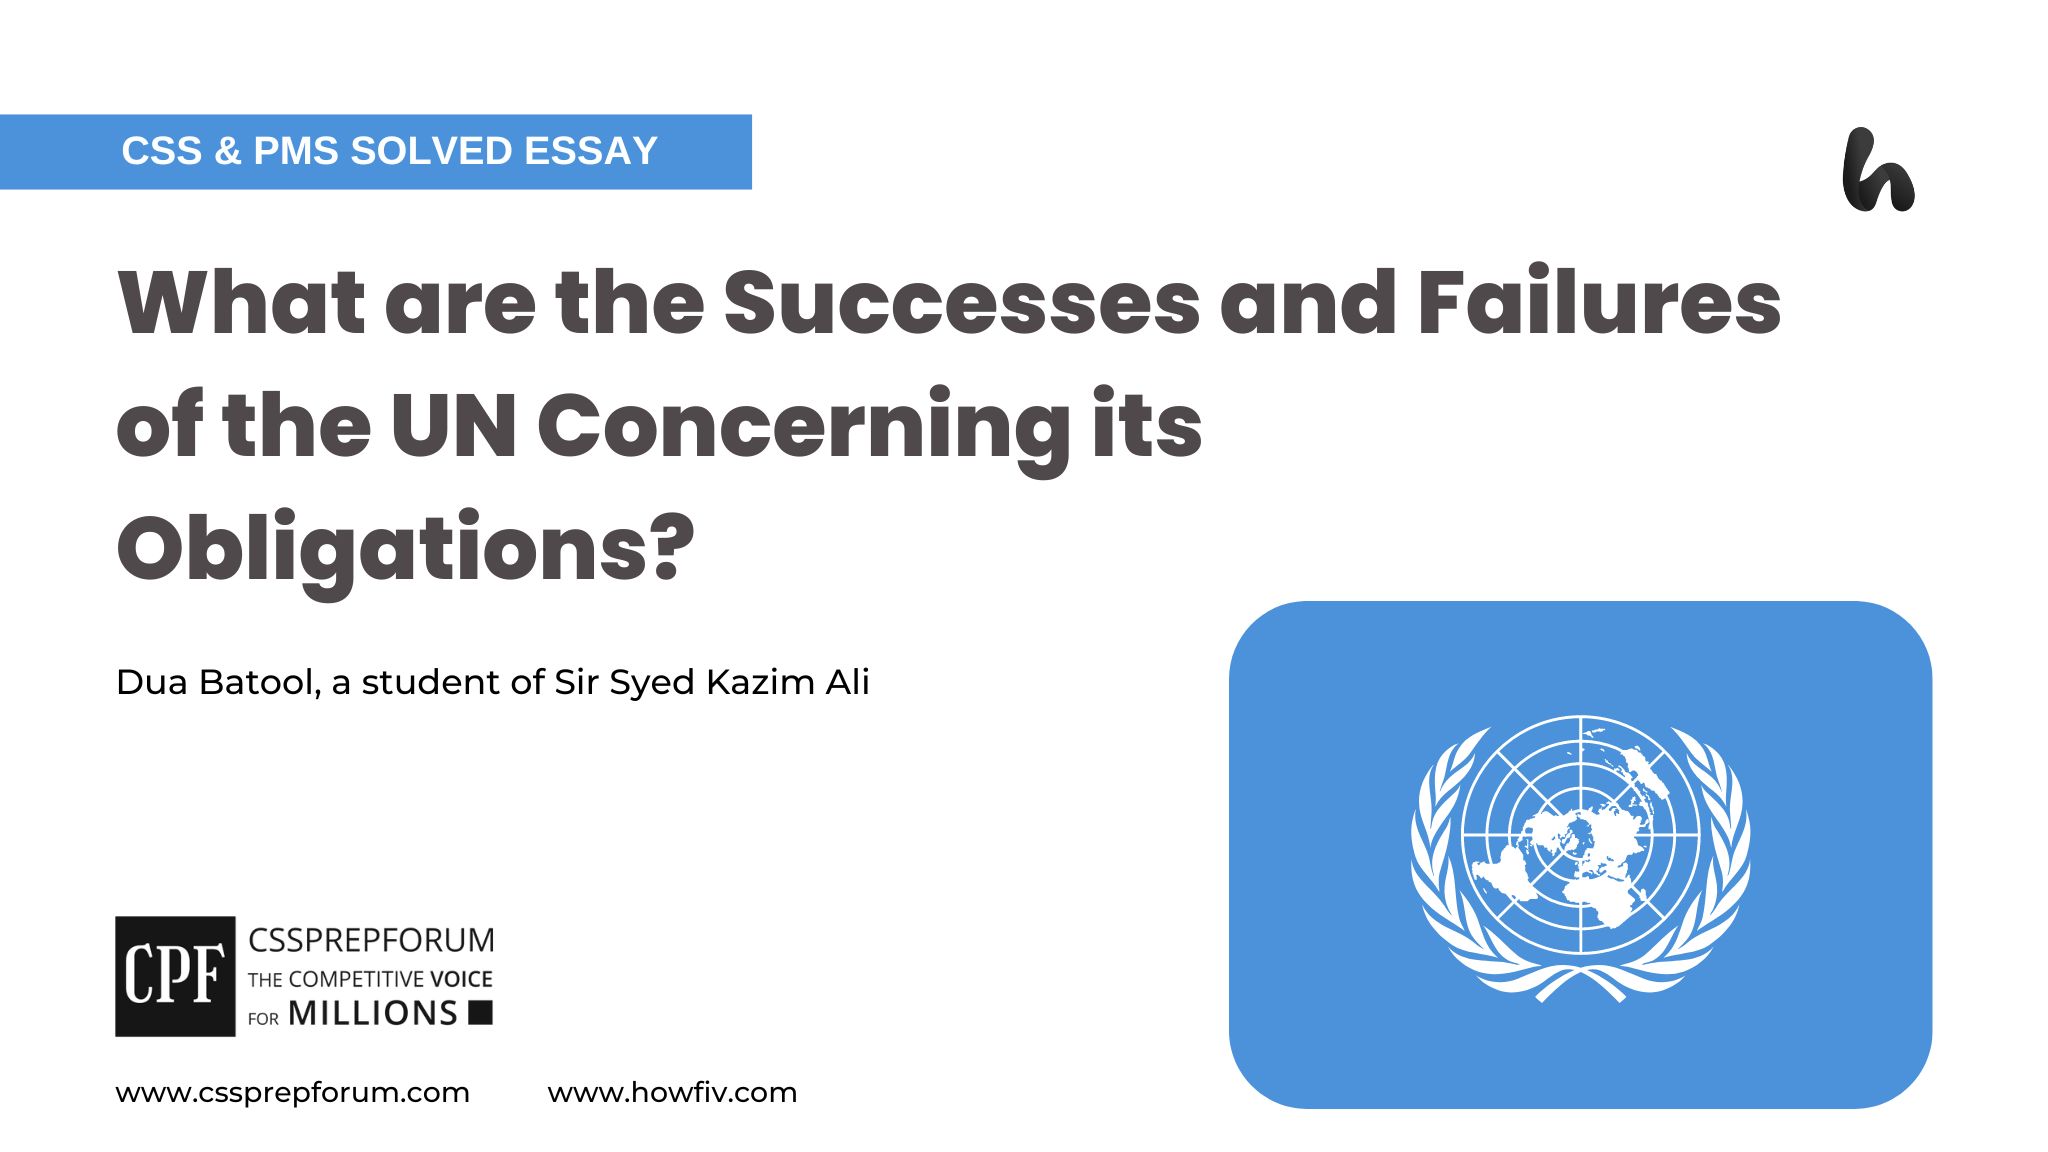 The UN's Successes and Failures Concerning its Obligations by Dua Batool